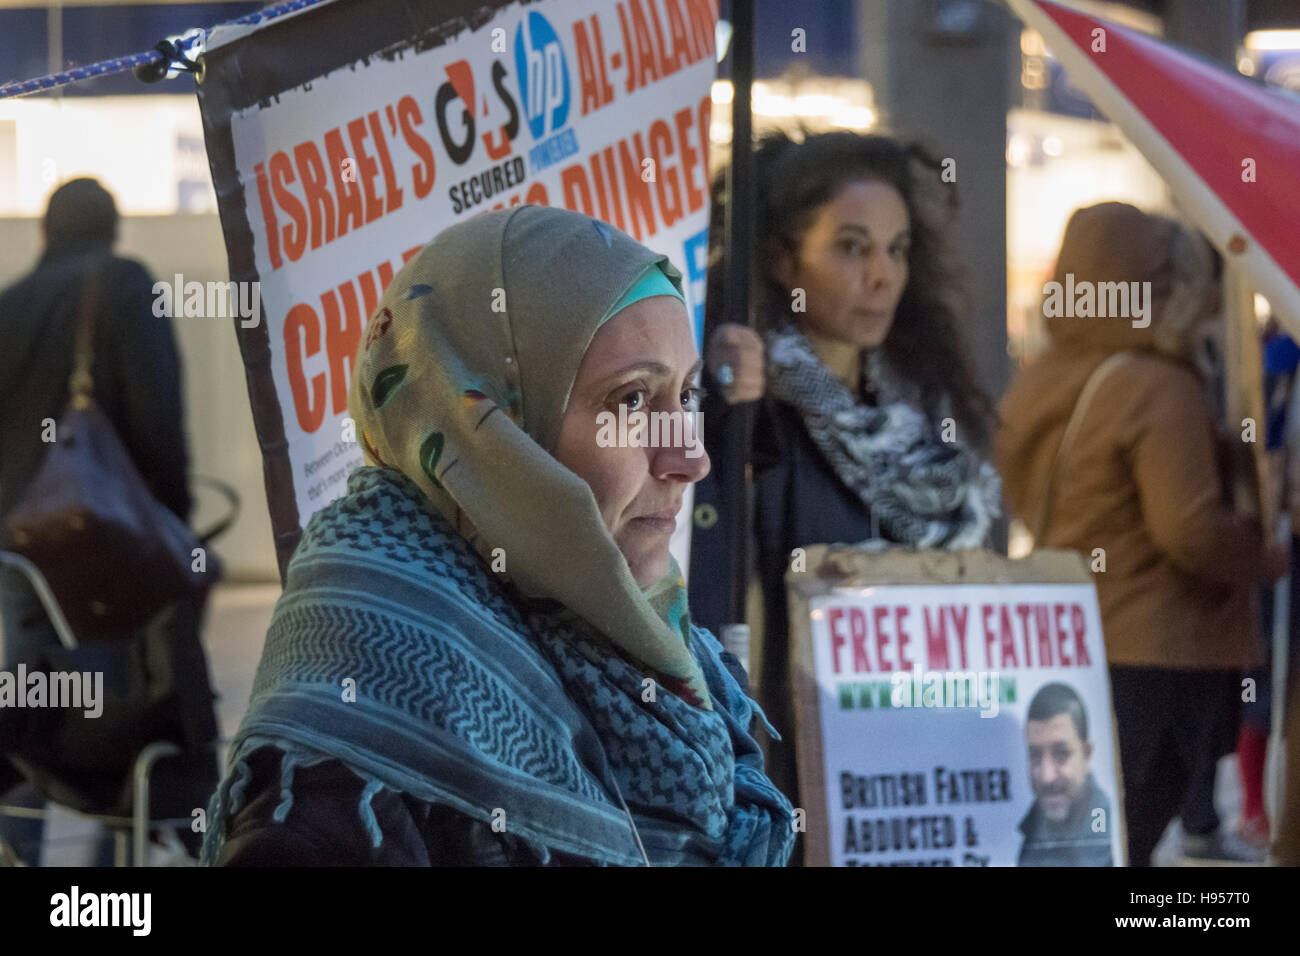 London, UK. 18th November 2016. Laila Sharary, wife of Fayez Shahary at the protest by human rights group Inminds outside the headquarters of British security company G4S over the abduction by Israel and subsequent torture of British national and father of five Fayez Sharary. Arrested by Israeli forces  on 15 September when leaving the West Bank for Jordan with his wife and youngest child to fly home after a family visit he was tortured for 3 weeks by Israeli secret police to force a confession An Israeli judge declared this worthless and inadmissible and ordered his release but he is still he Stock Photo